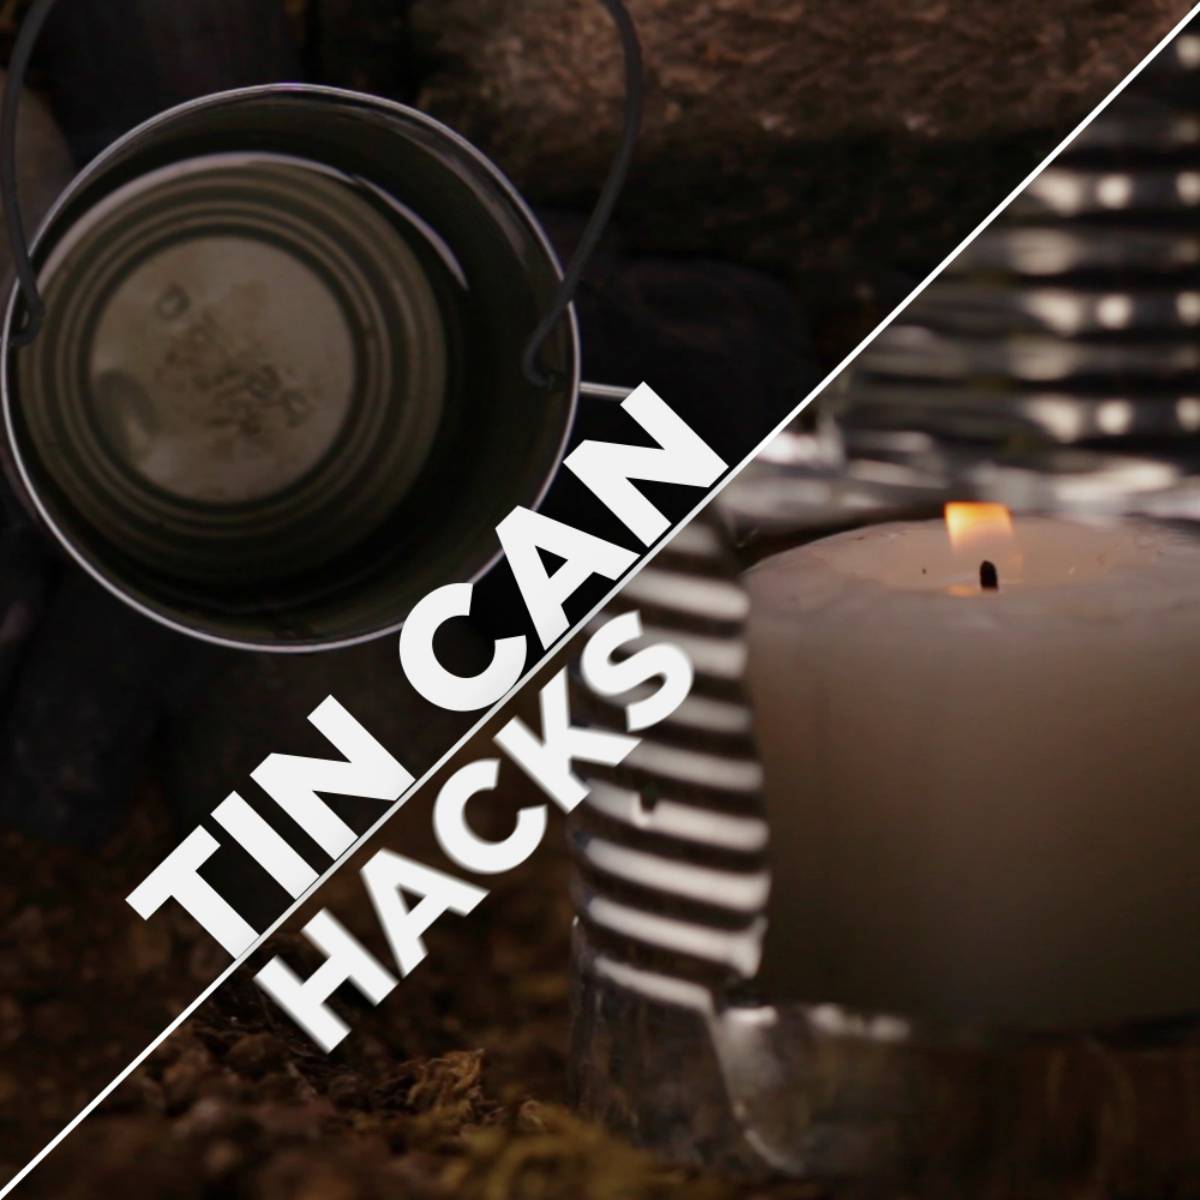 Tin can lantern stove | Surprising Survival Uses For A Tin Can